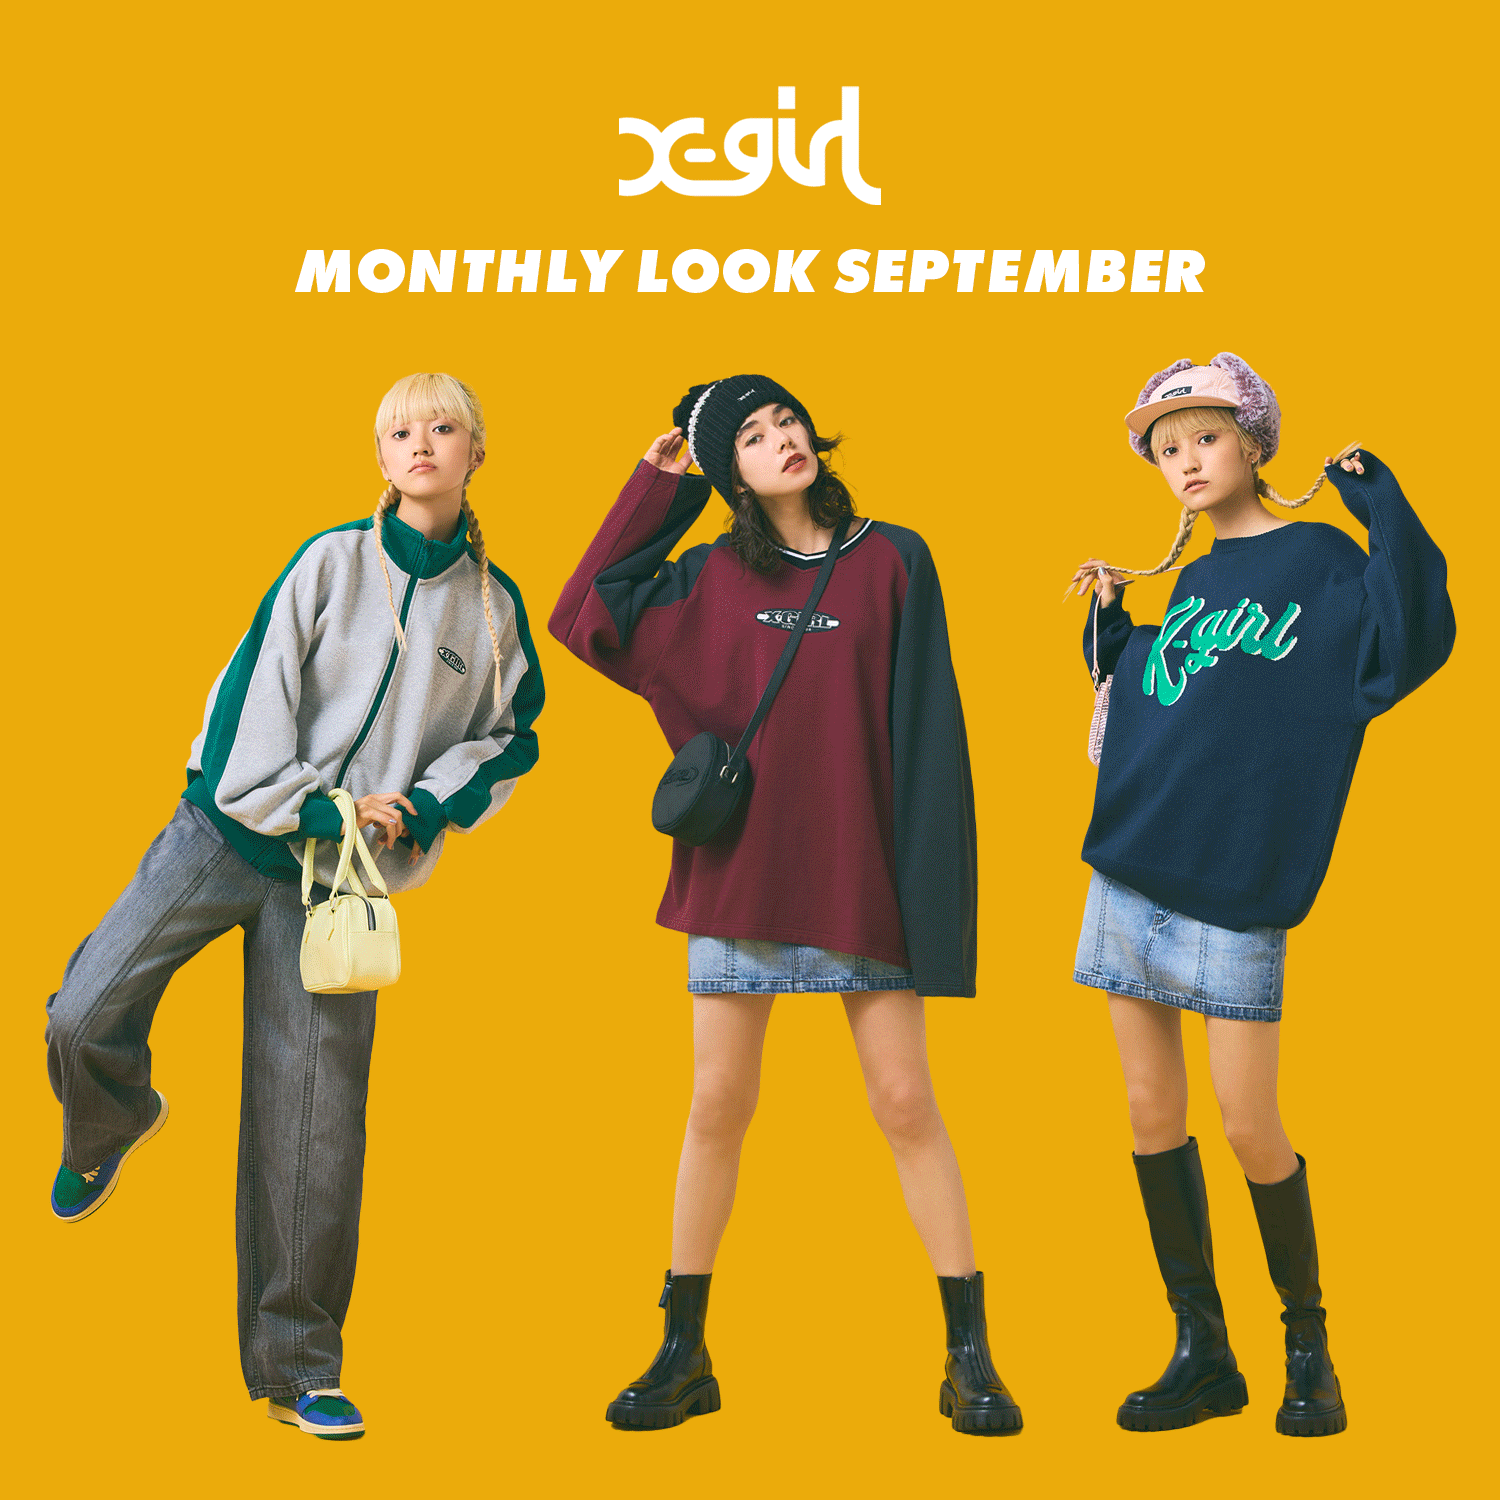 MONTHLY LOOK SEPTEMBER